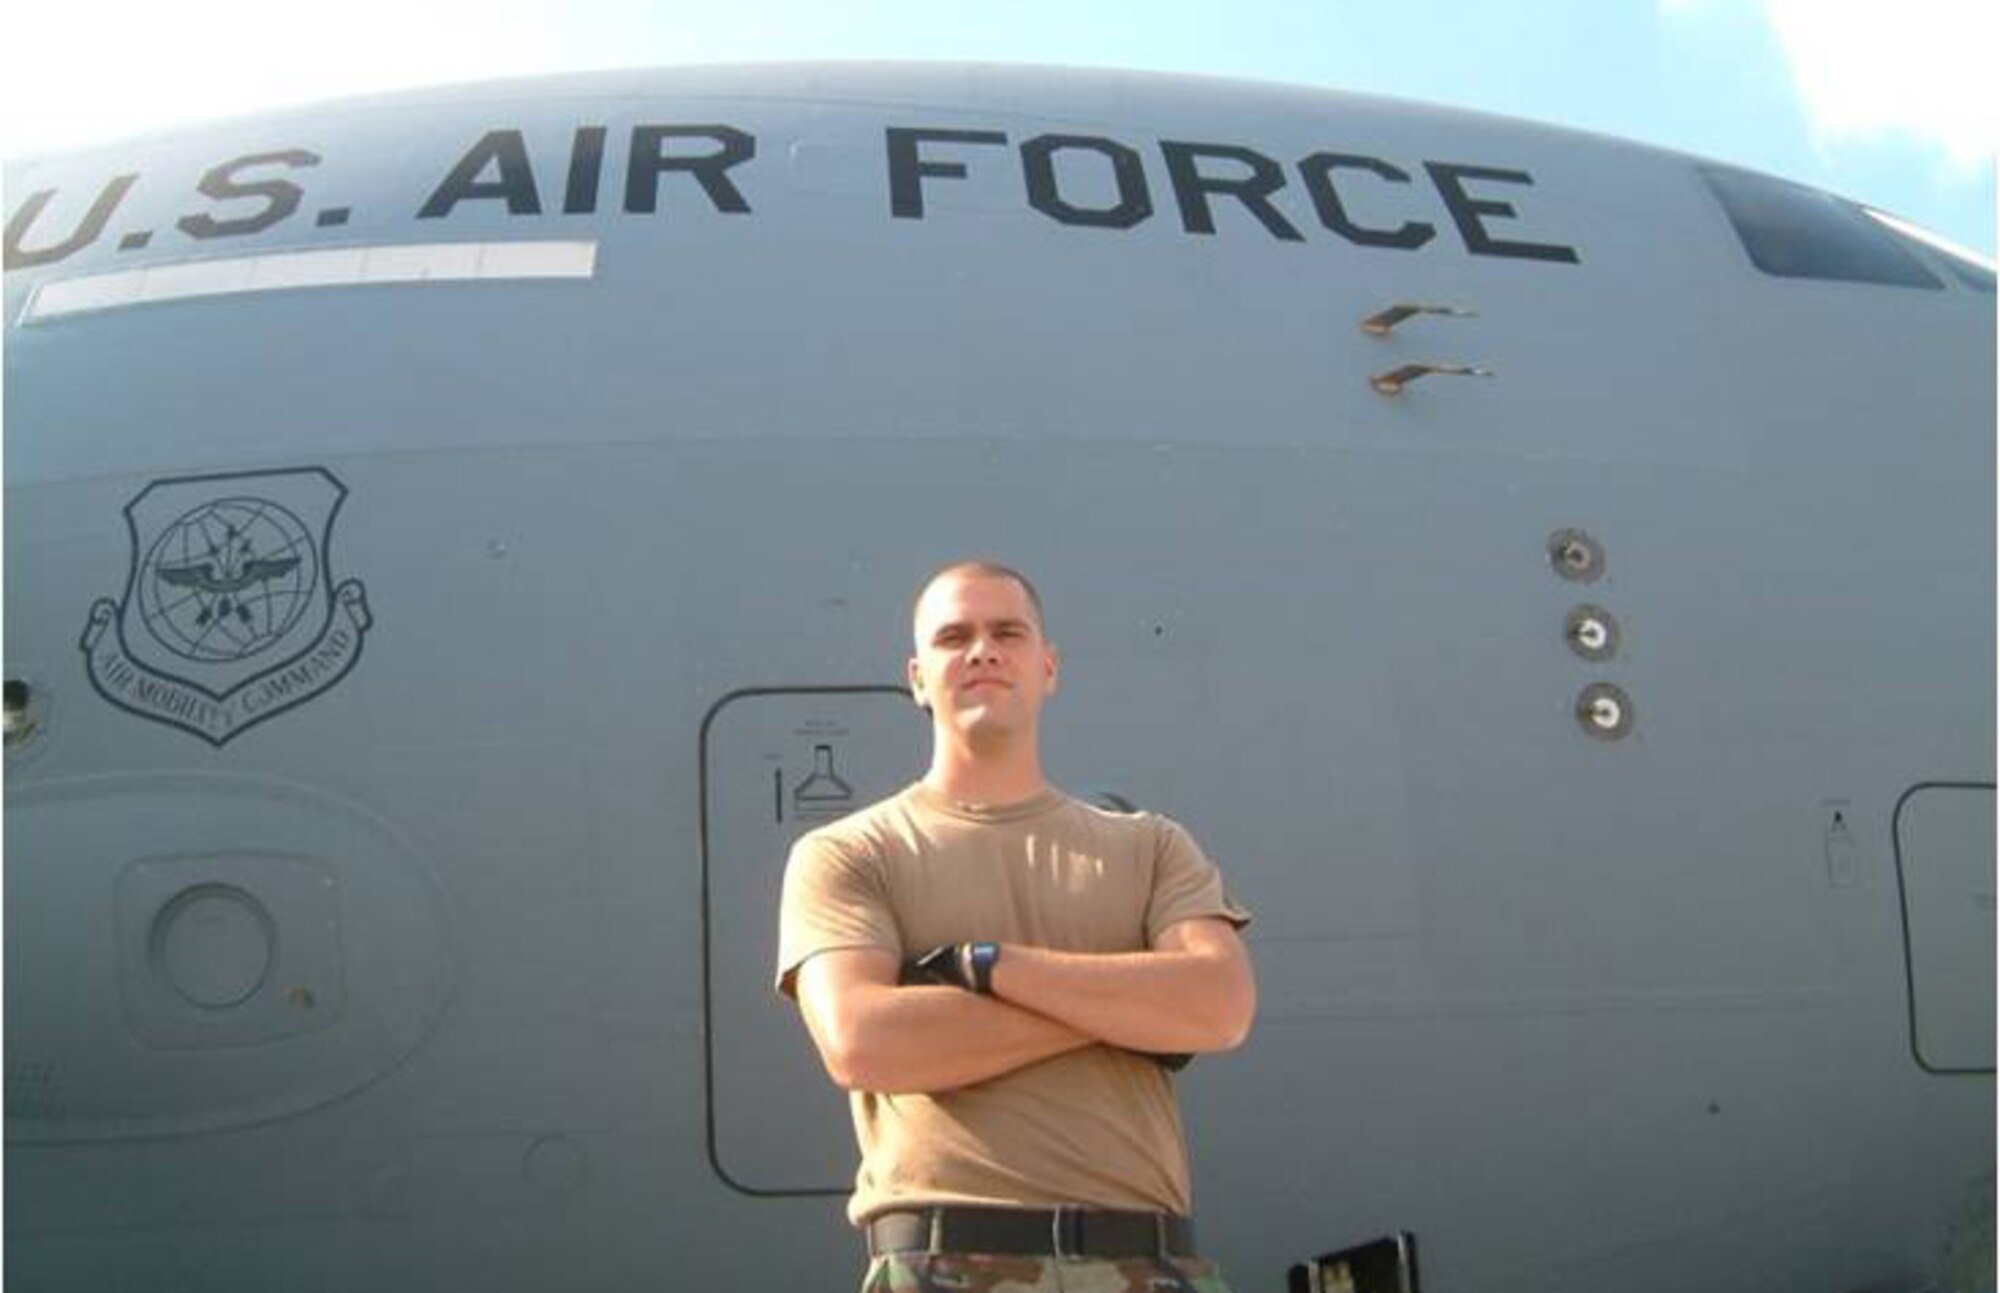 Staff Sgt. Paul Corcoran poses for a “hero shot” in front of a C-17 in Poland while deployed with the 86th Contingency Response Group last fall. Sergeant Corcoran is a Kentucky National Guardsman who accompanied the 86th CRG last fall on a humanitarian mission to Tblisi, Georgia. (Photo courtesy of the 86th Contingency Response Group)